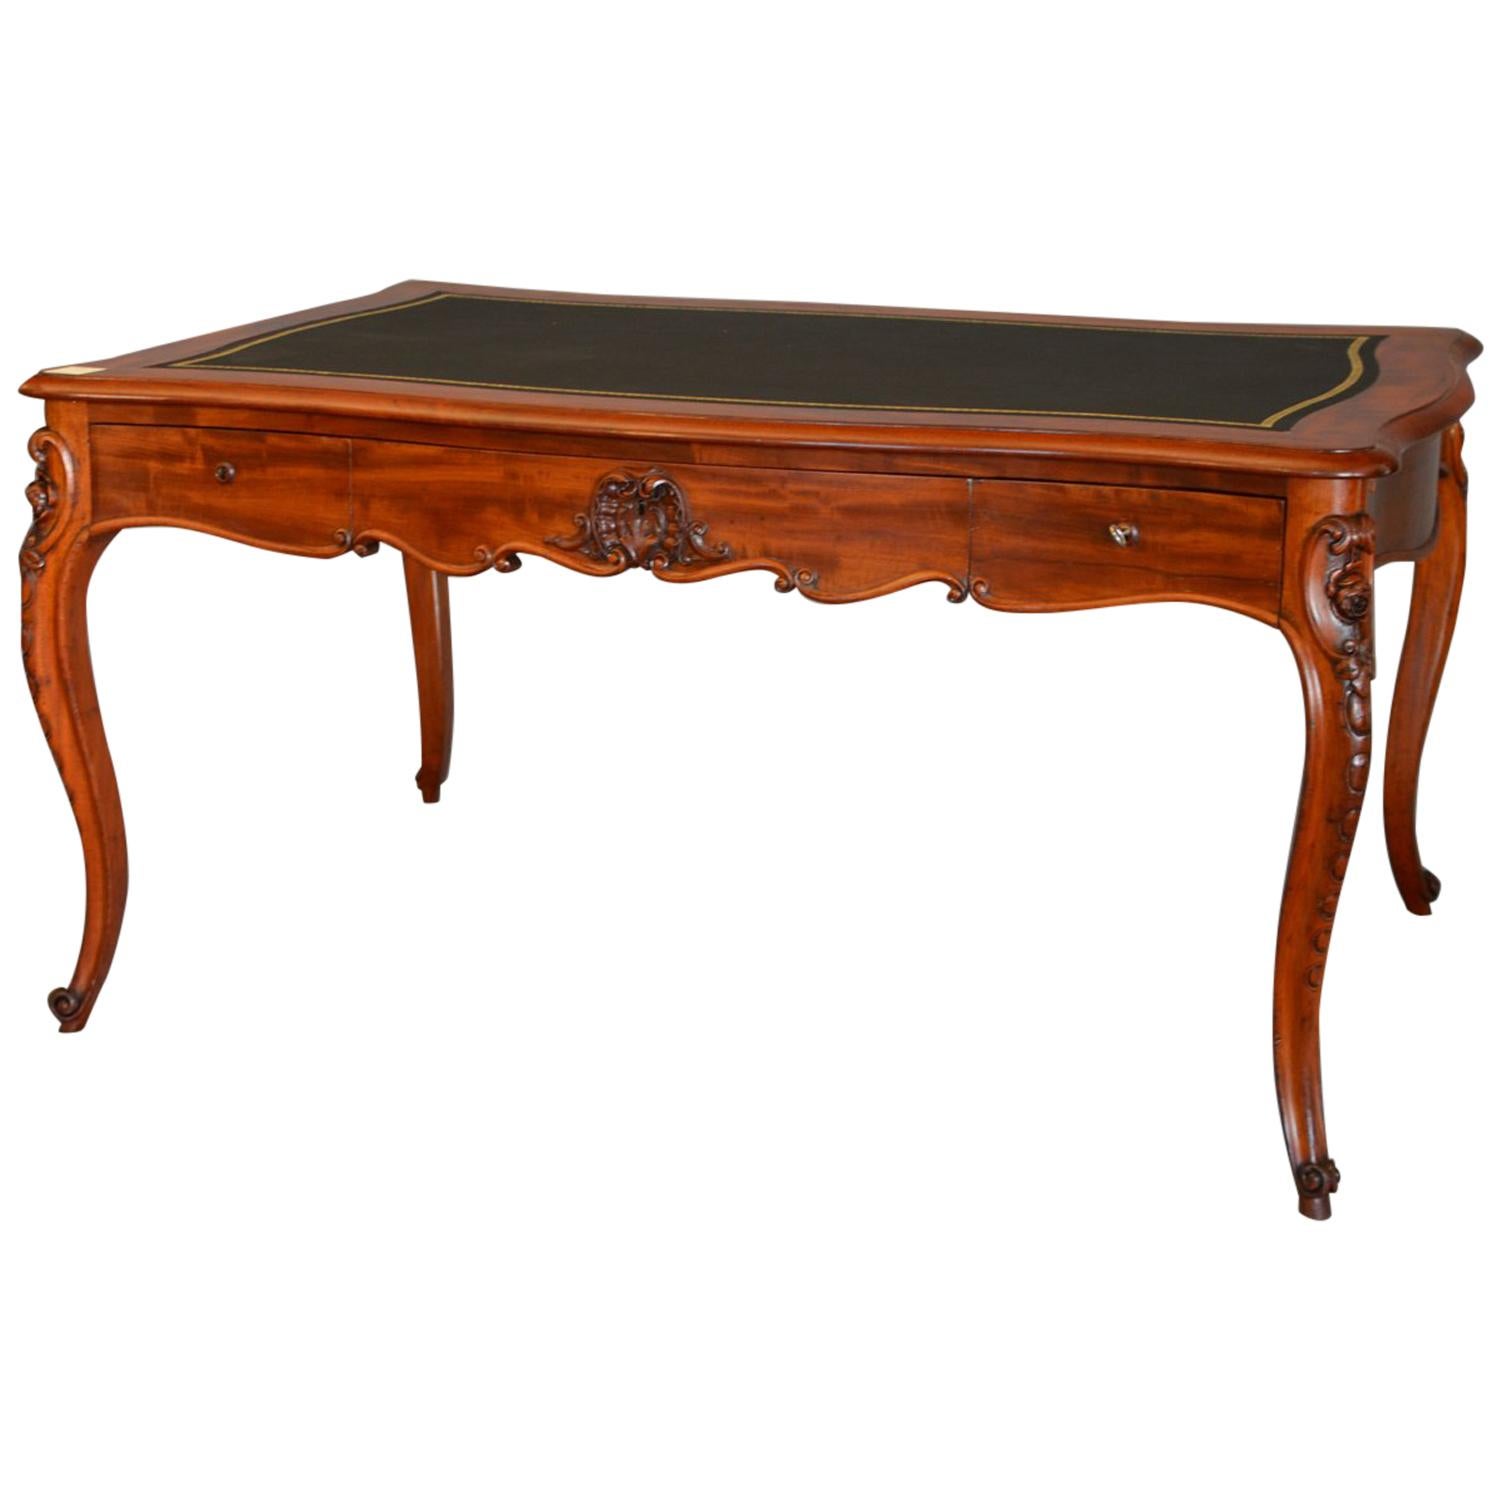 Louis Philippe Desk in Light Mahogany and French Leather from 1835 Restored